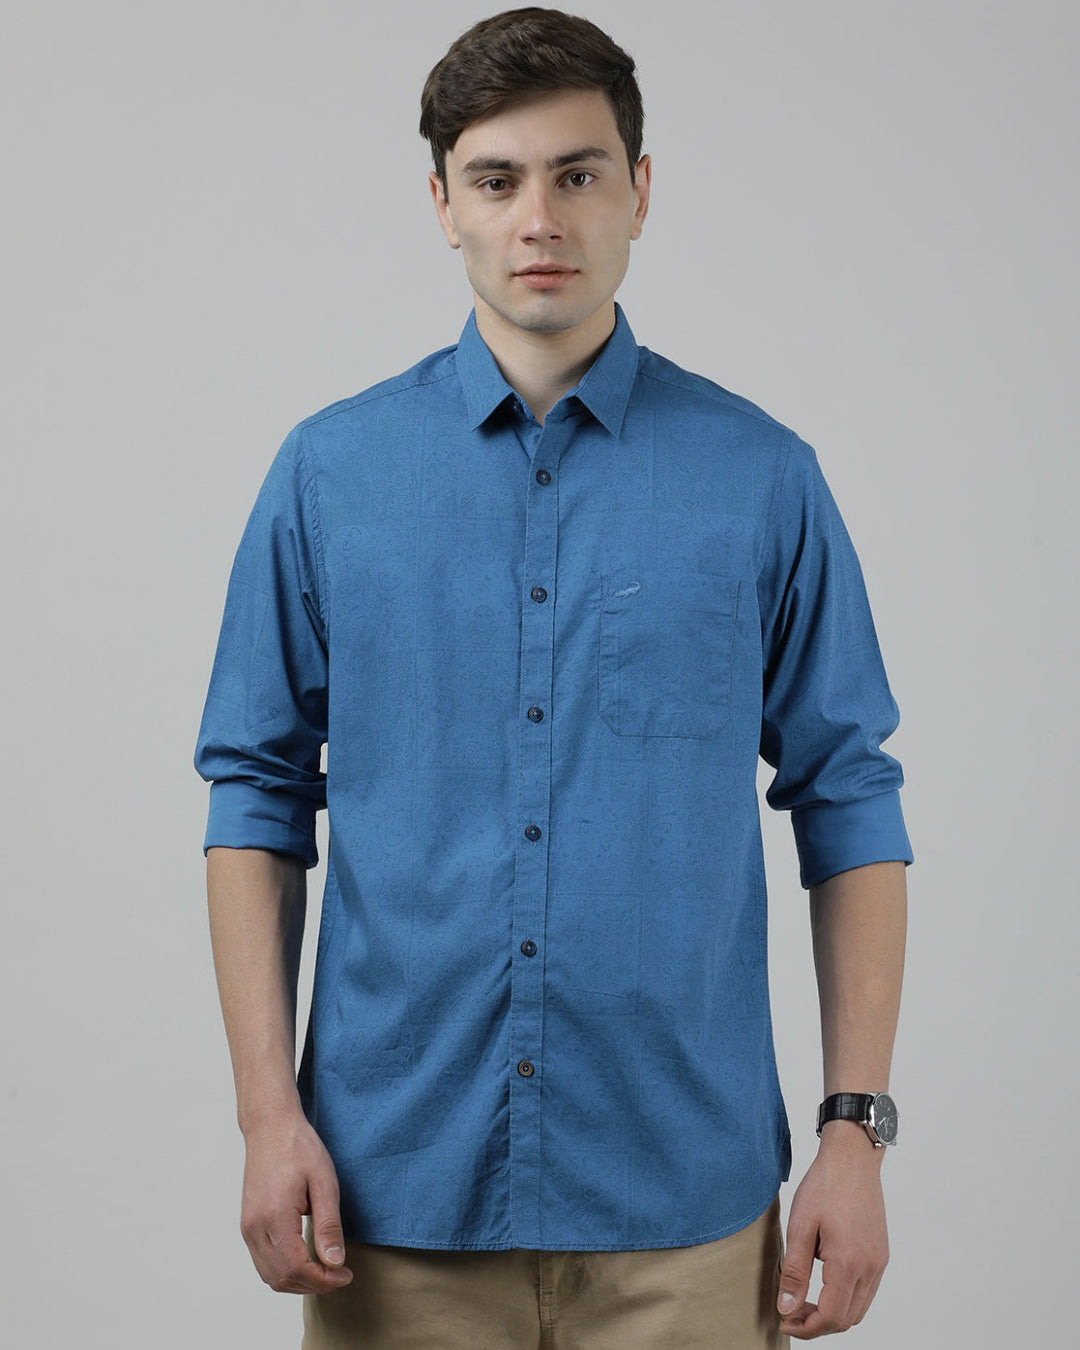 Casual Royal Blue Full Sleeve Comfort Fit Printed Shirt with Collar for Men